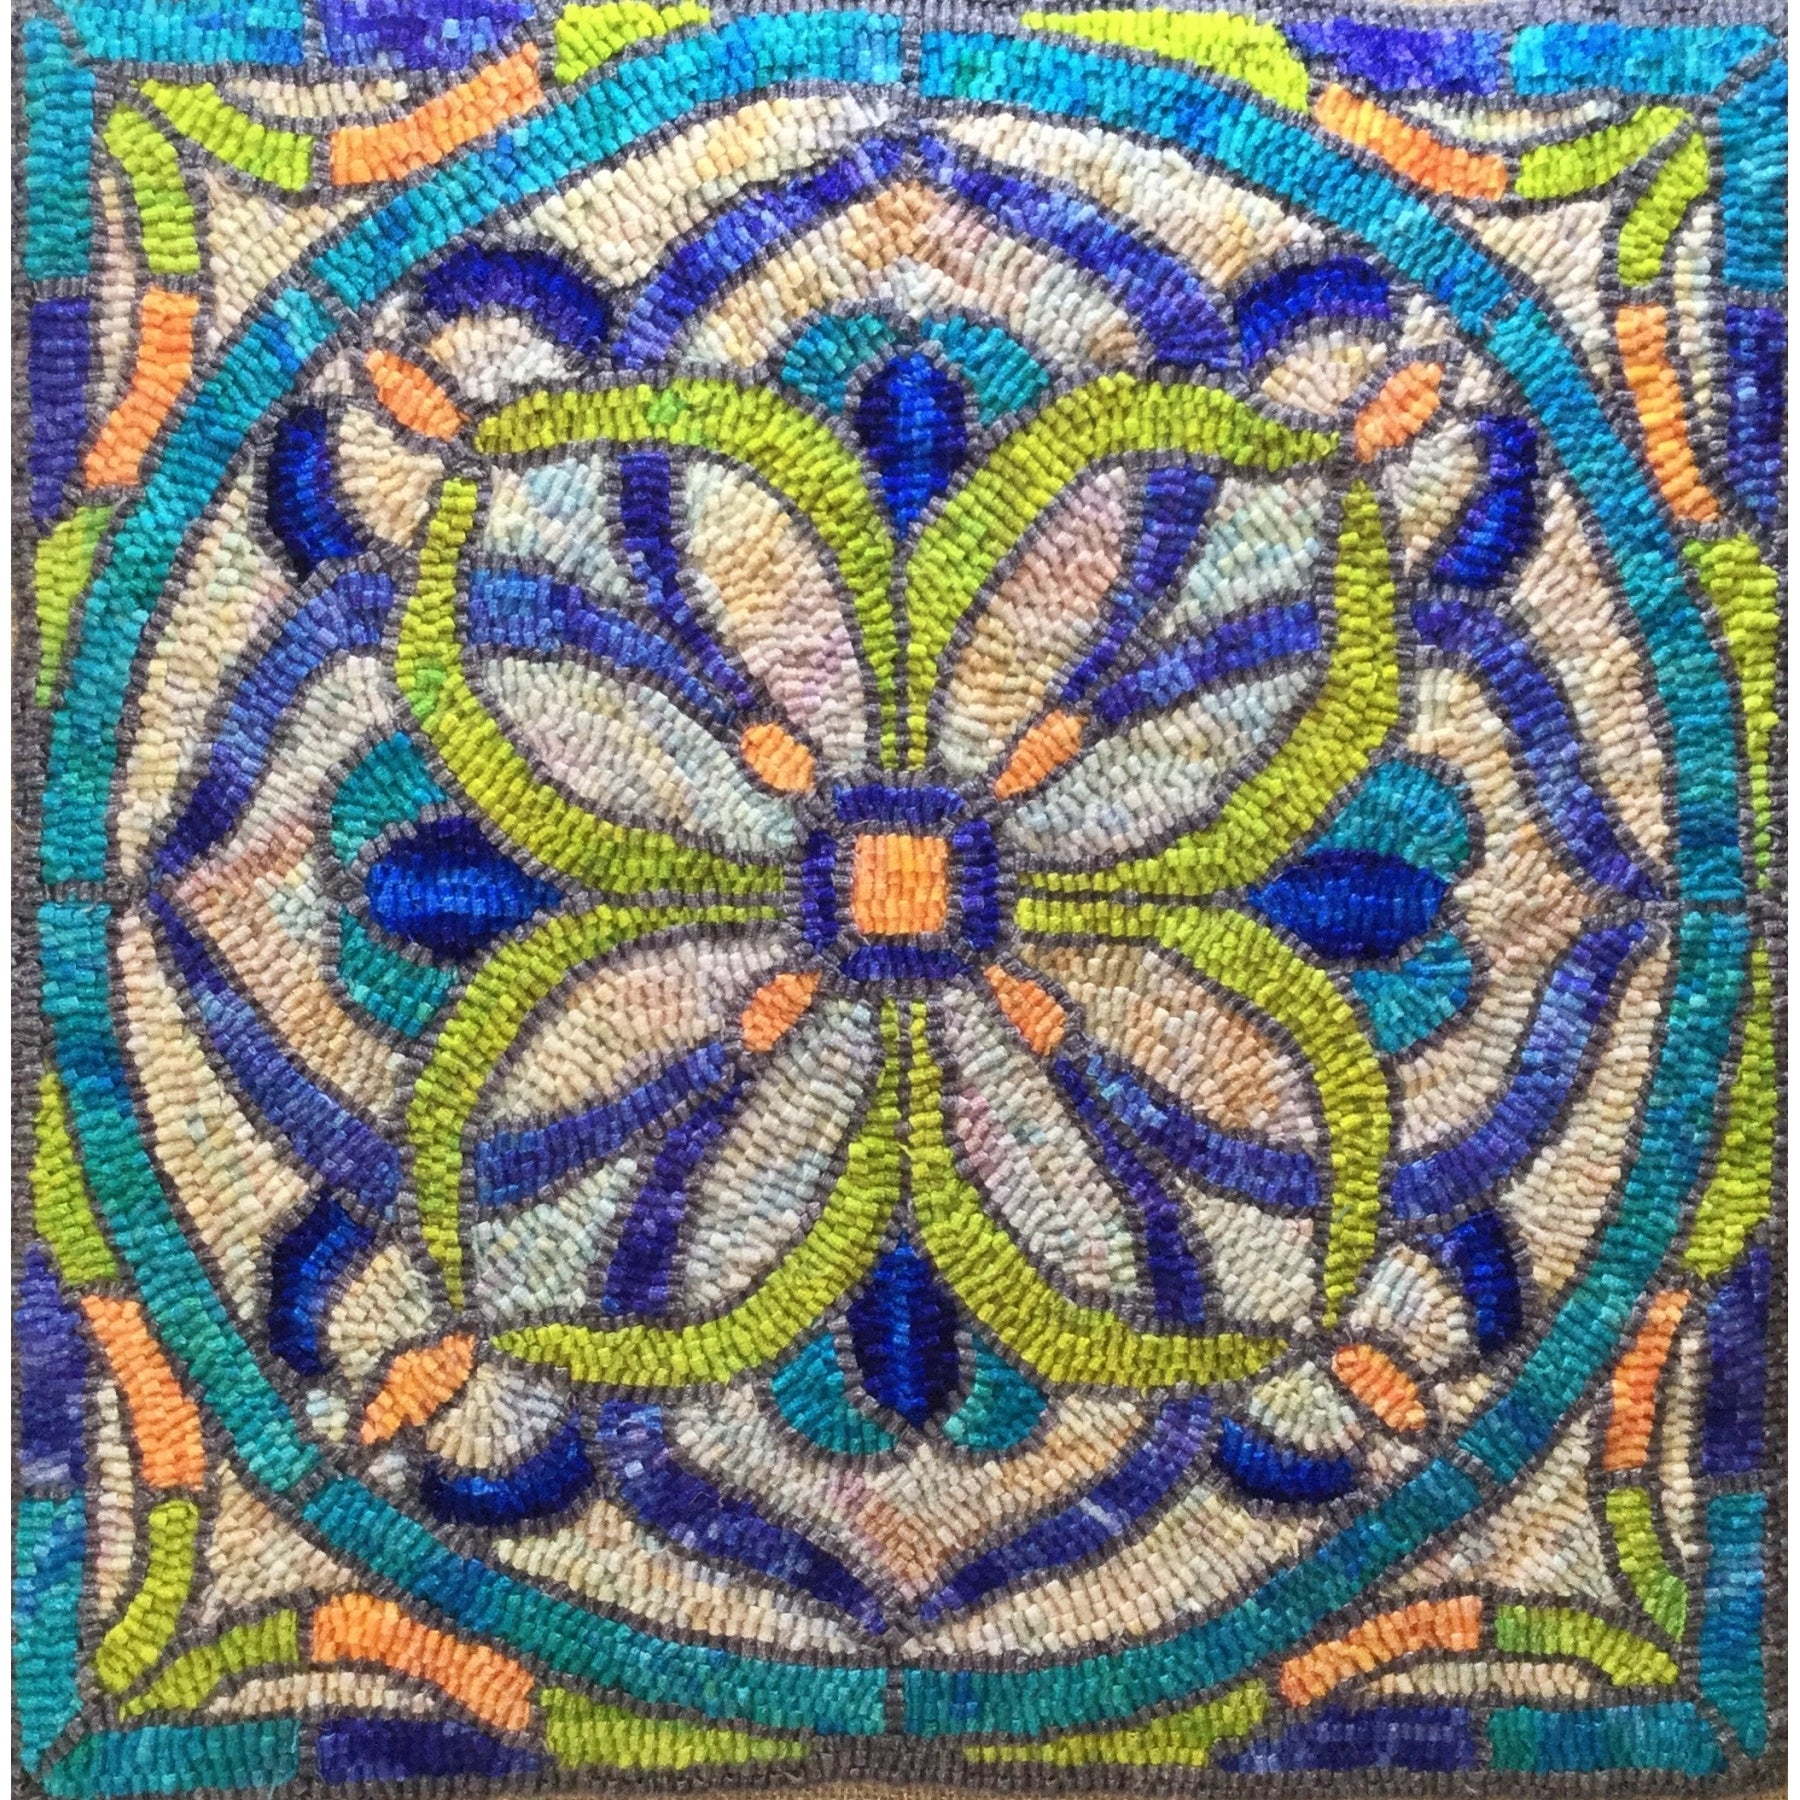 Stained Glass Mosaic, rug hooked by Brenda Patterson